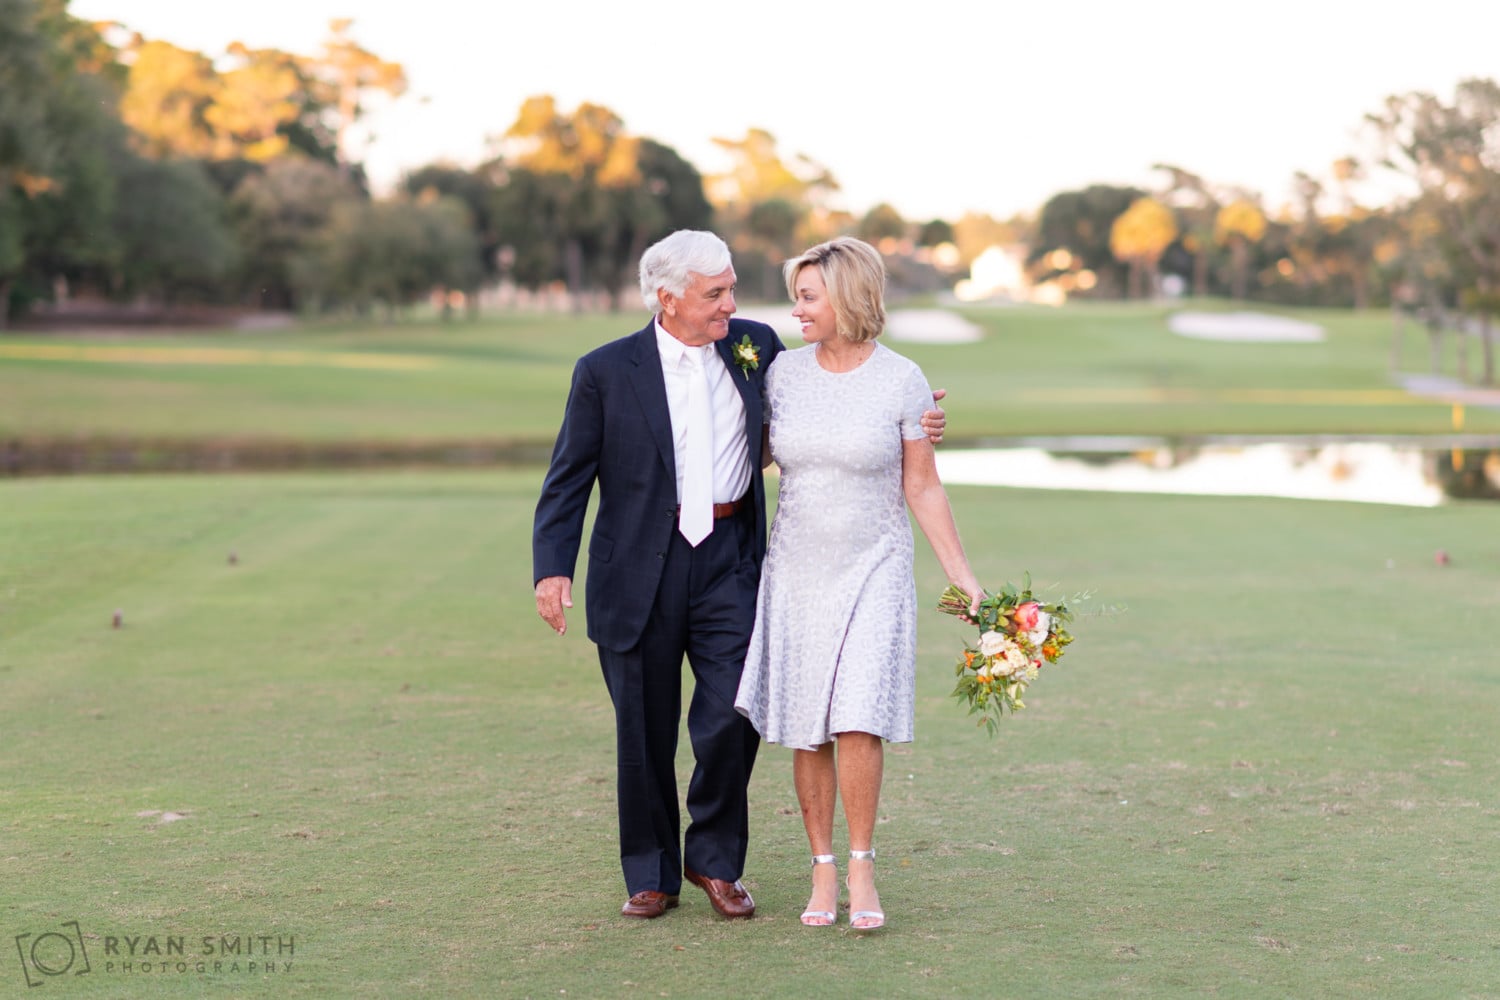 Bride and groom walking together down the golf course - Dunes Golf and Beach Club - Myrtle Beach